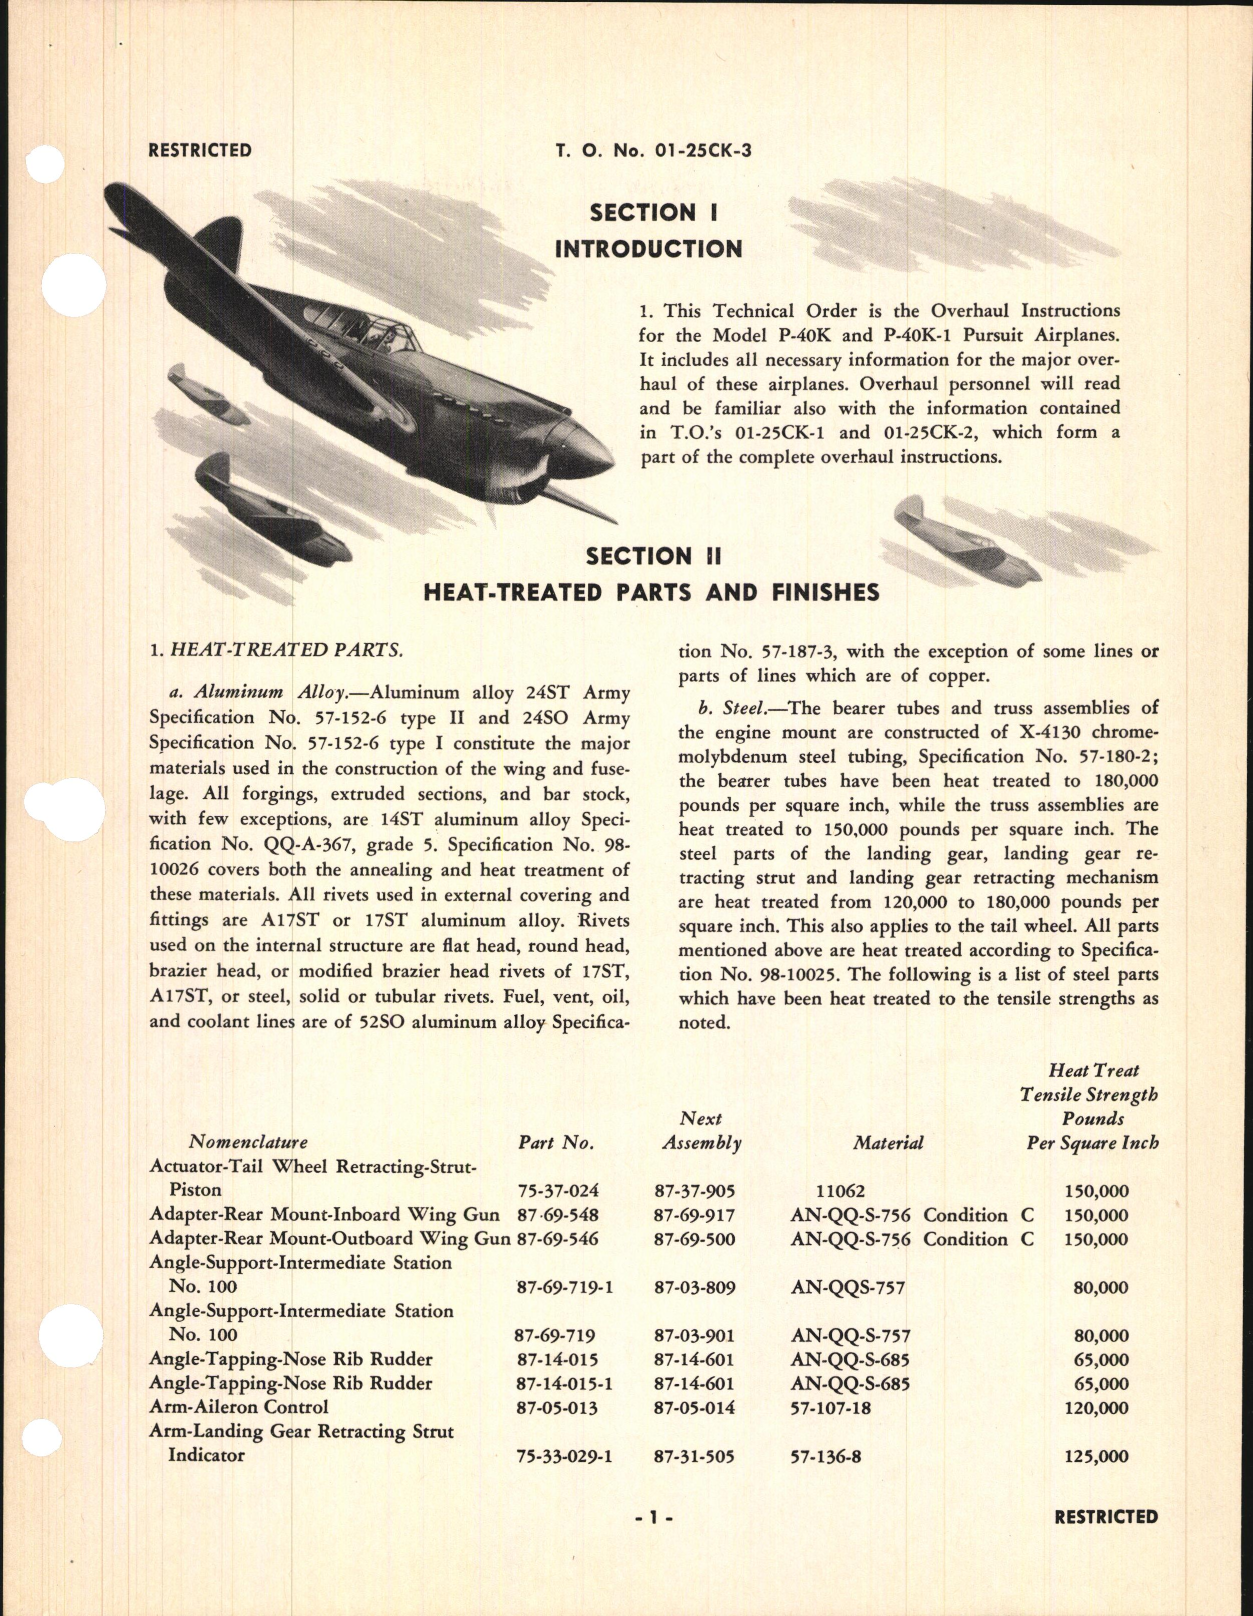 Sample page 7 from AirCorps Library document: Overhaul Instructions for the P-40K and P-40K-1 Fighter Airplanes